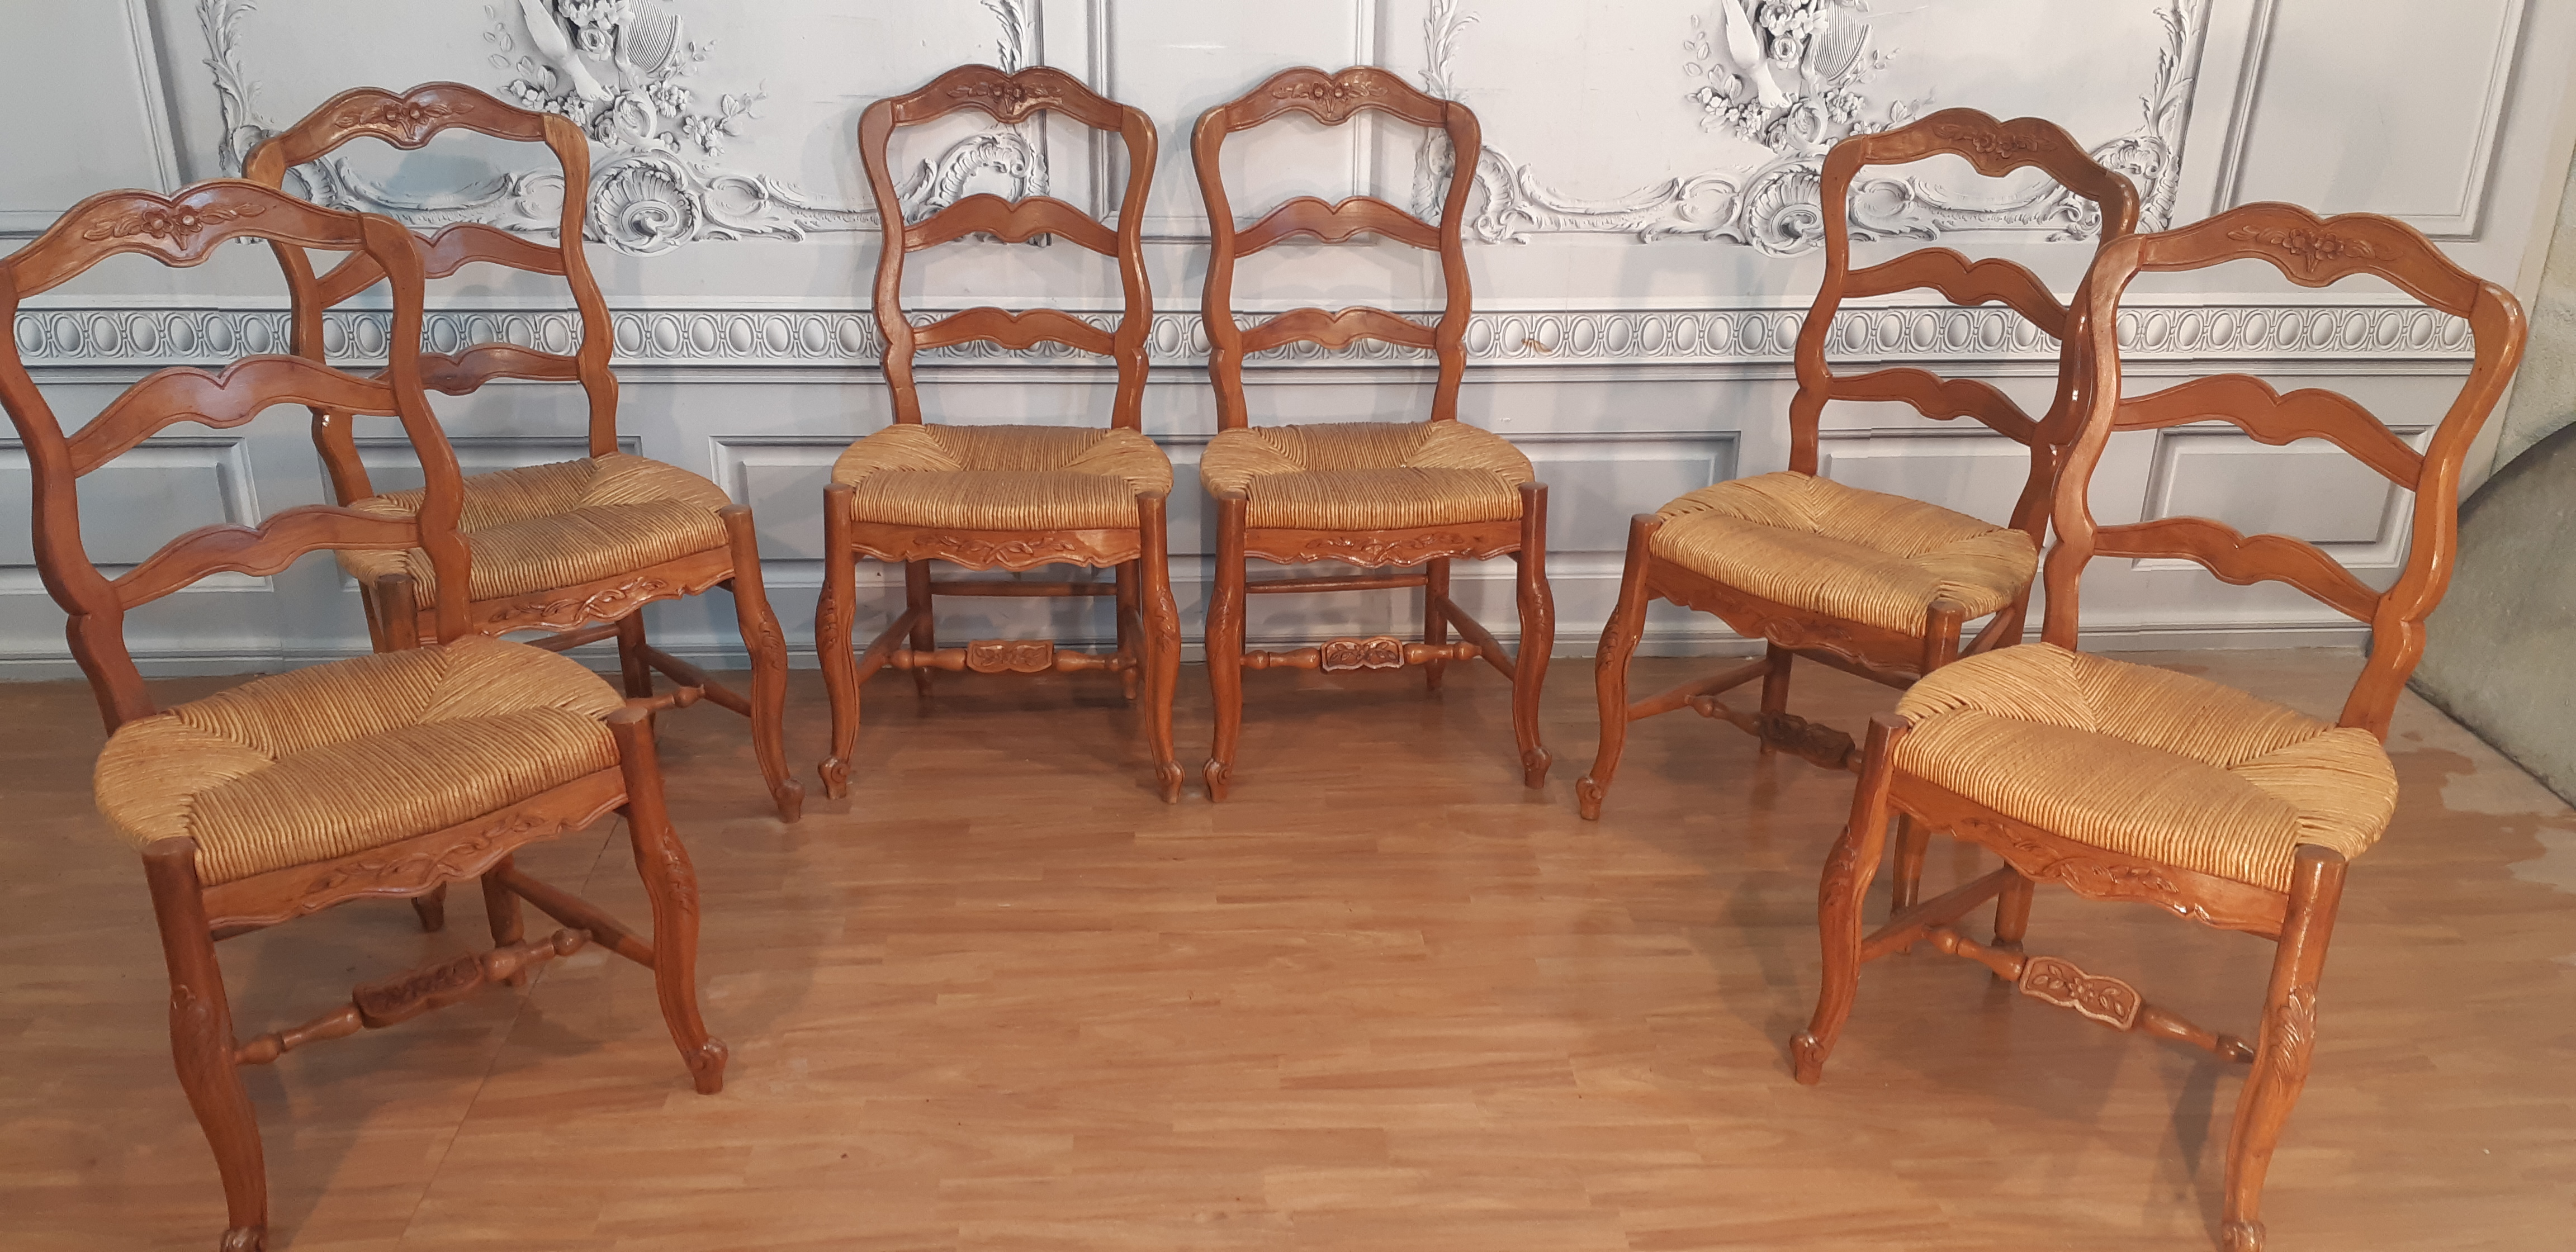 SET OF 6 PROVINCIAL LOUIS XV STYLE 35f36c